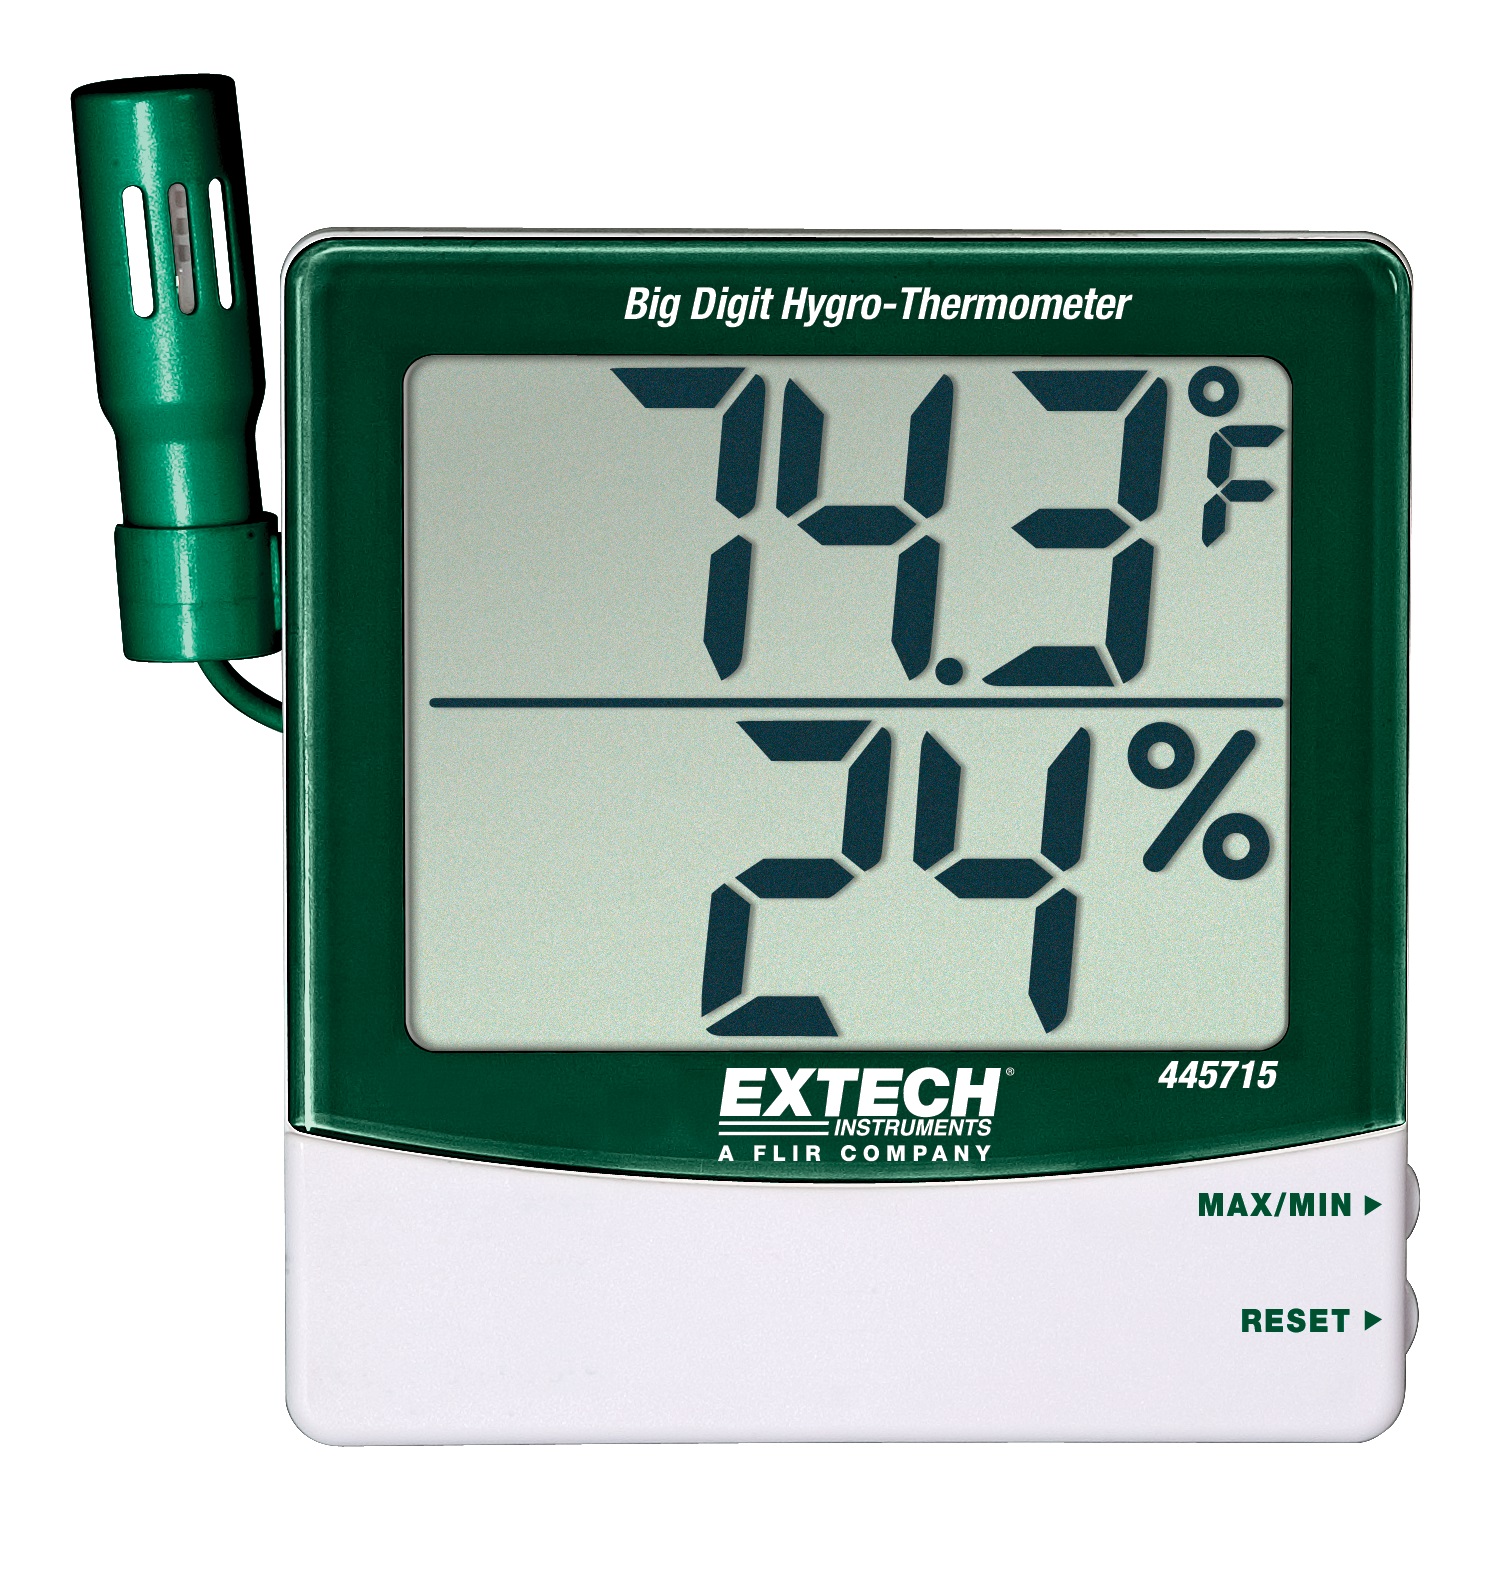 General Tools DTH800 - Digital Temperature and Humidity Meter with Clock